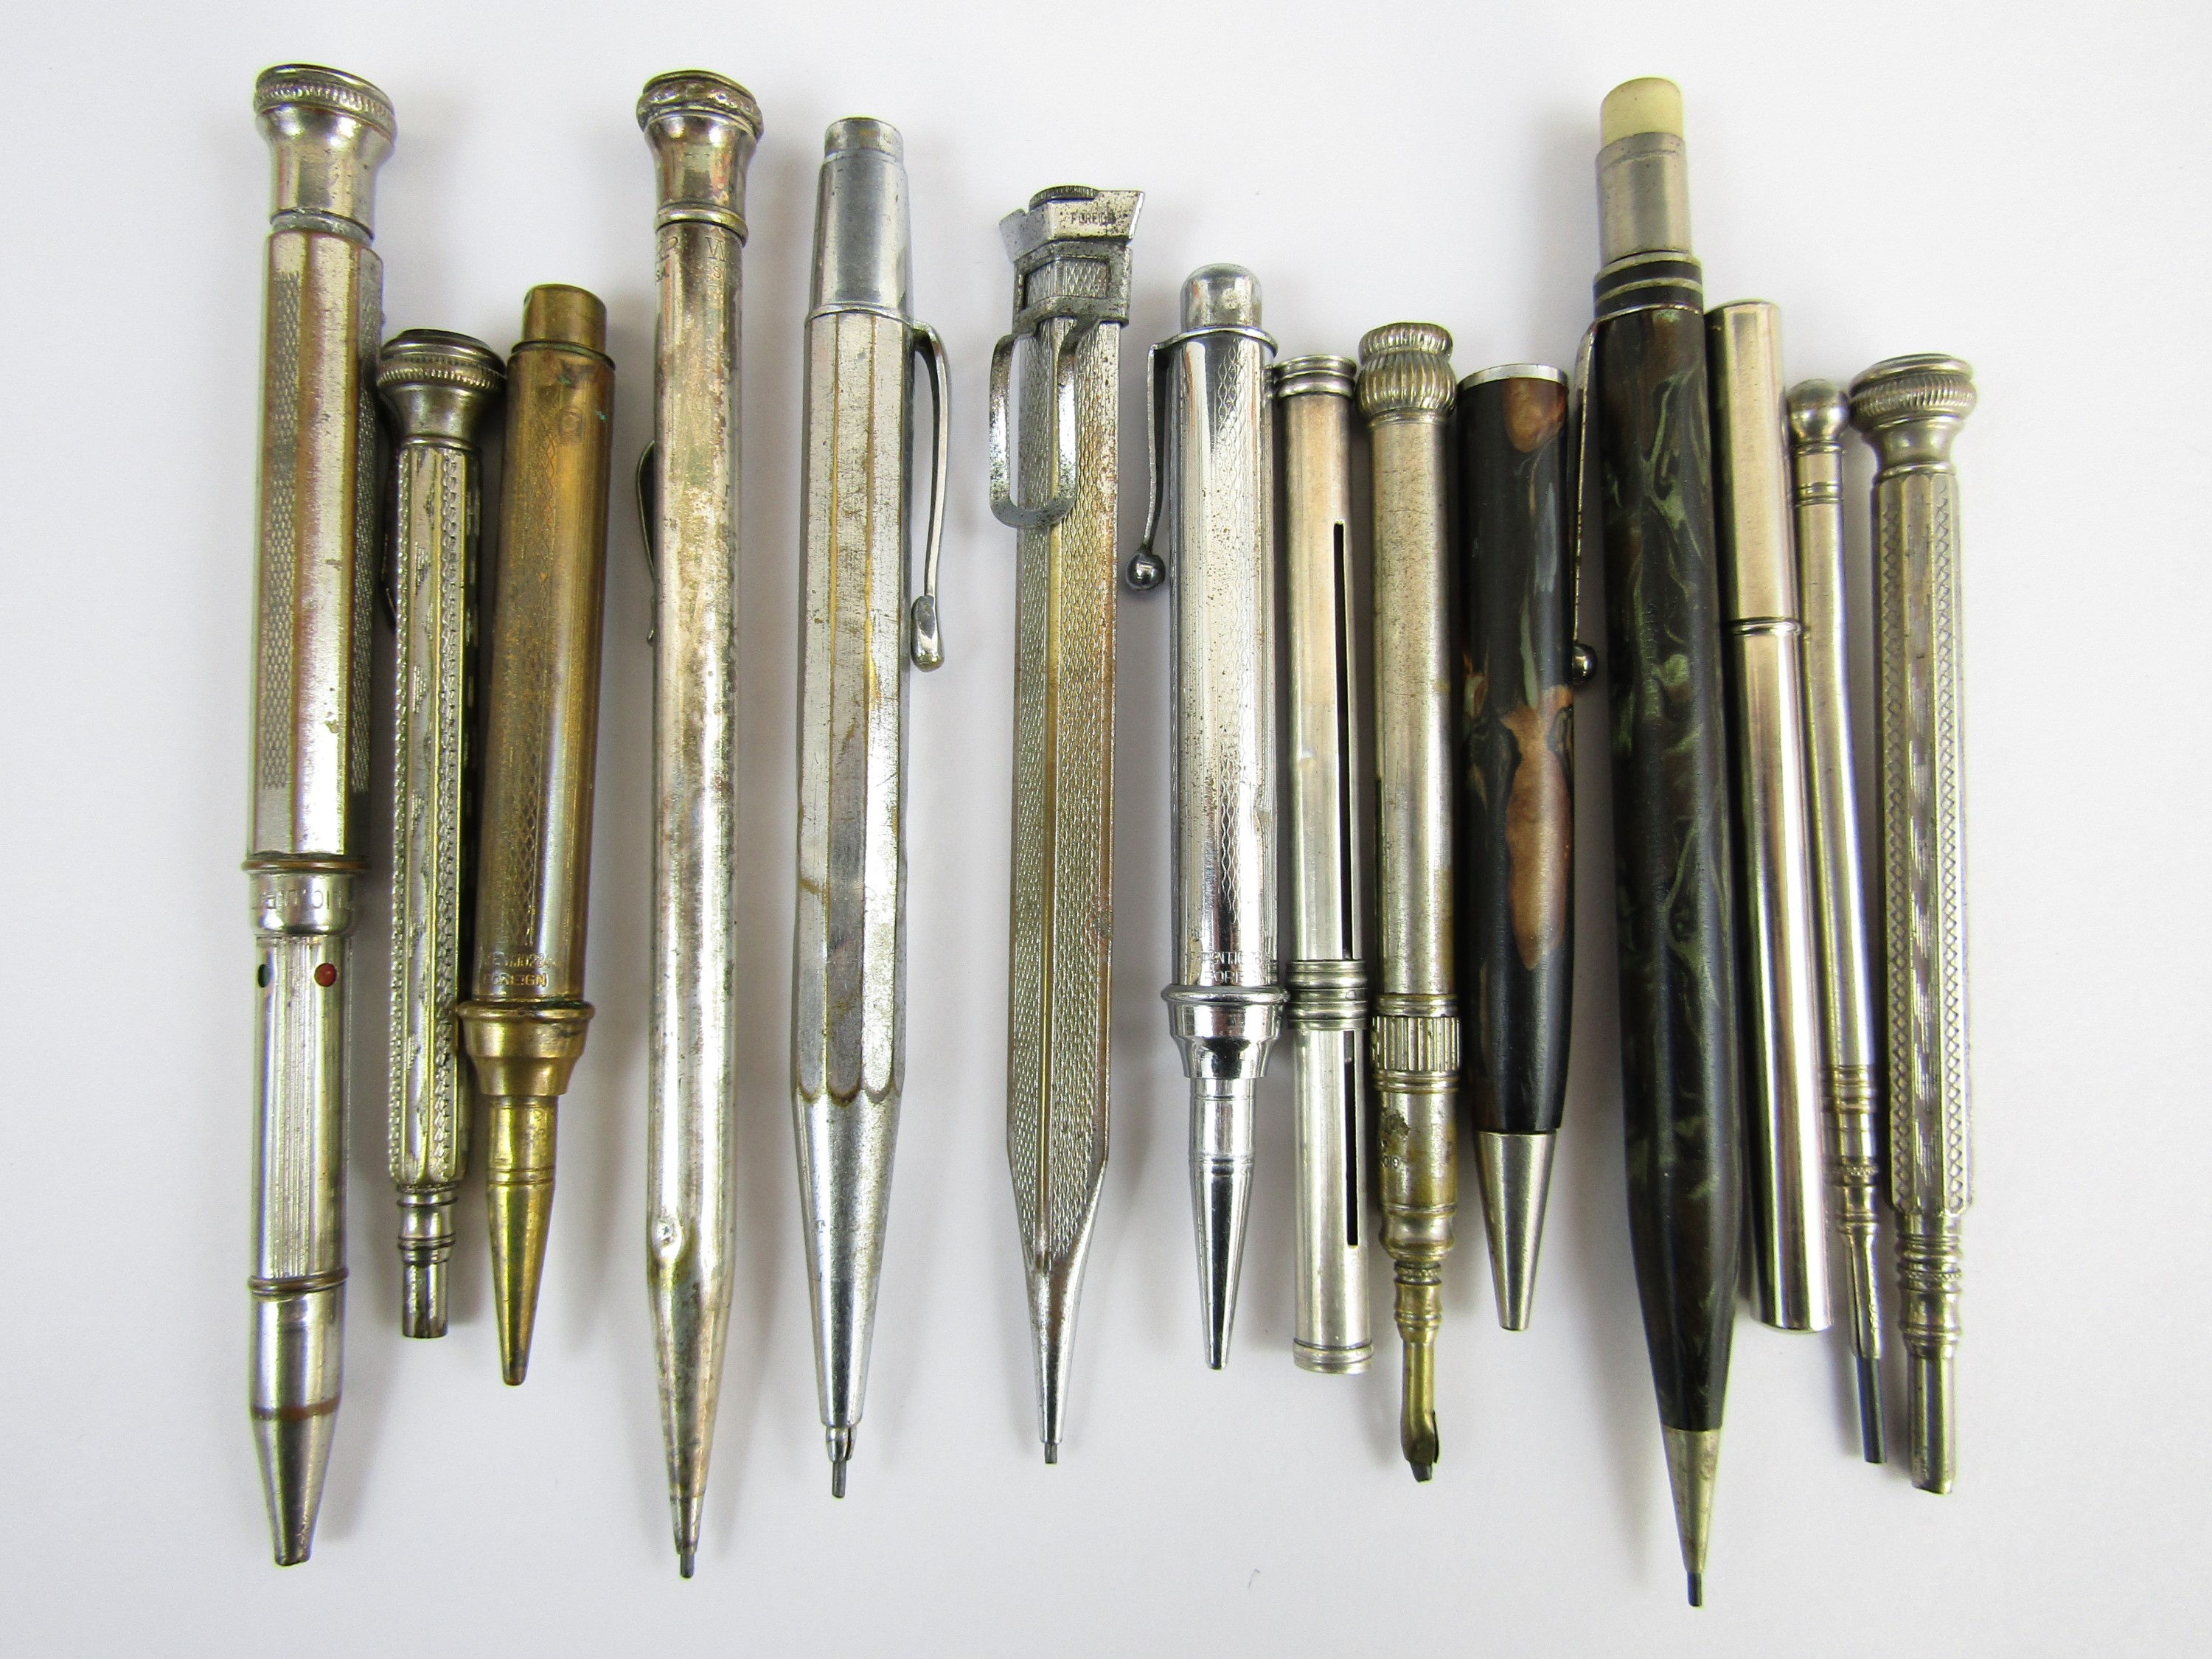 Fourteen vintage base-metal and celluloid propelling pencils